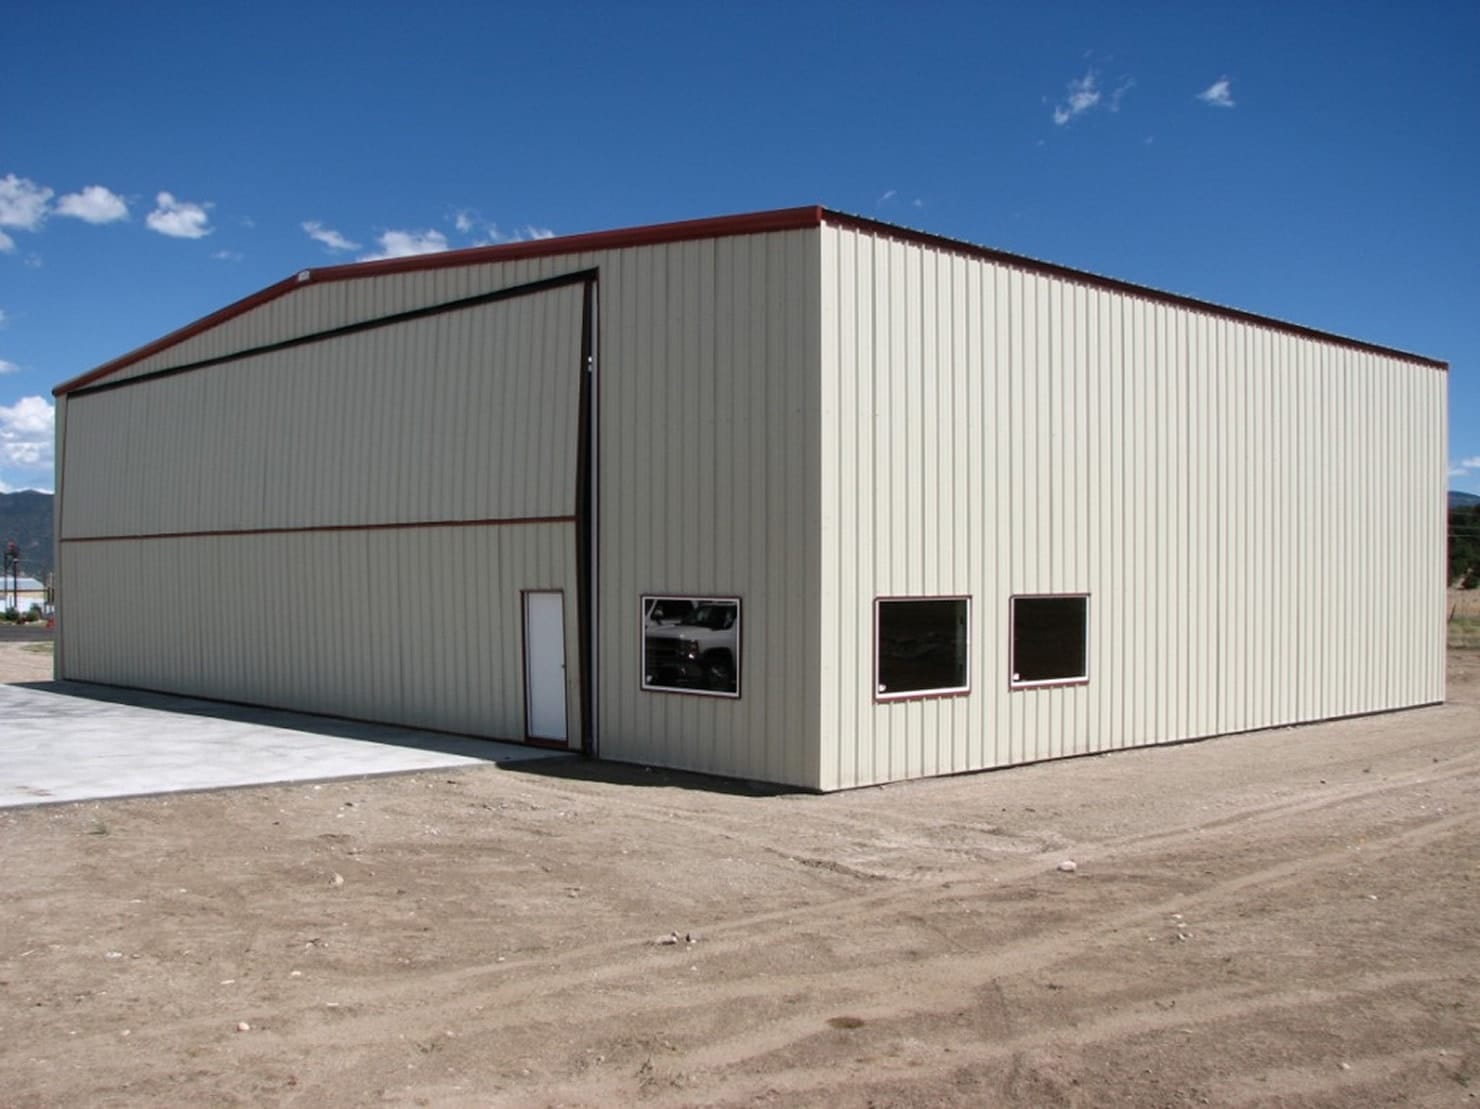 This image shows an airplane hangar built by General Steel.